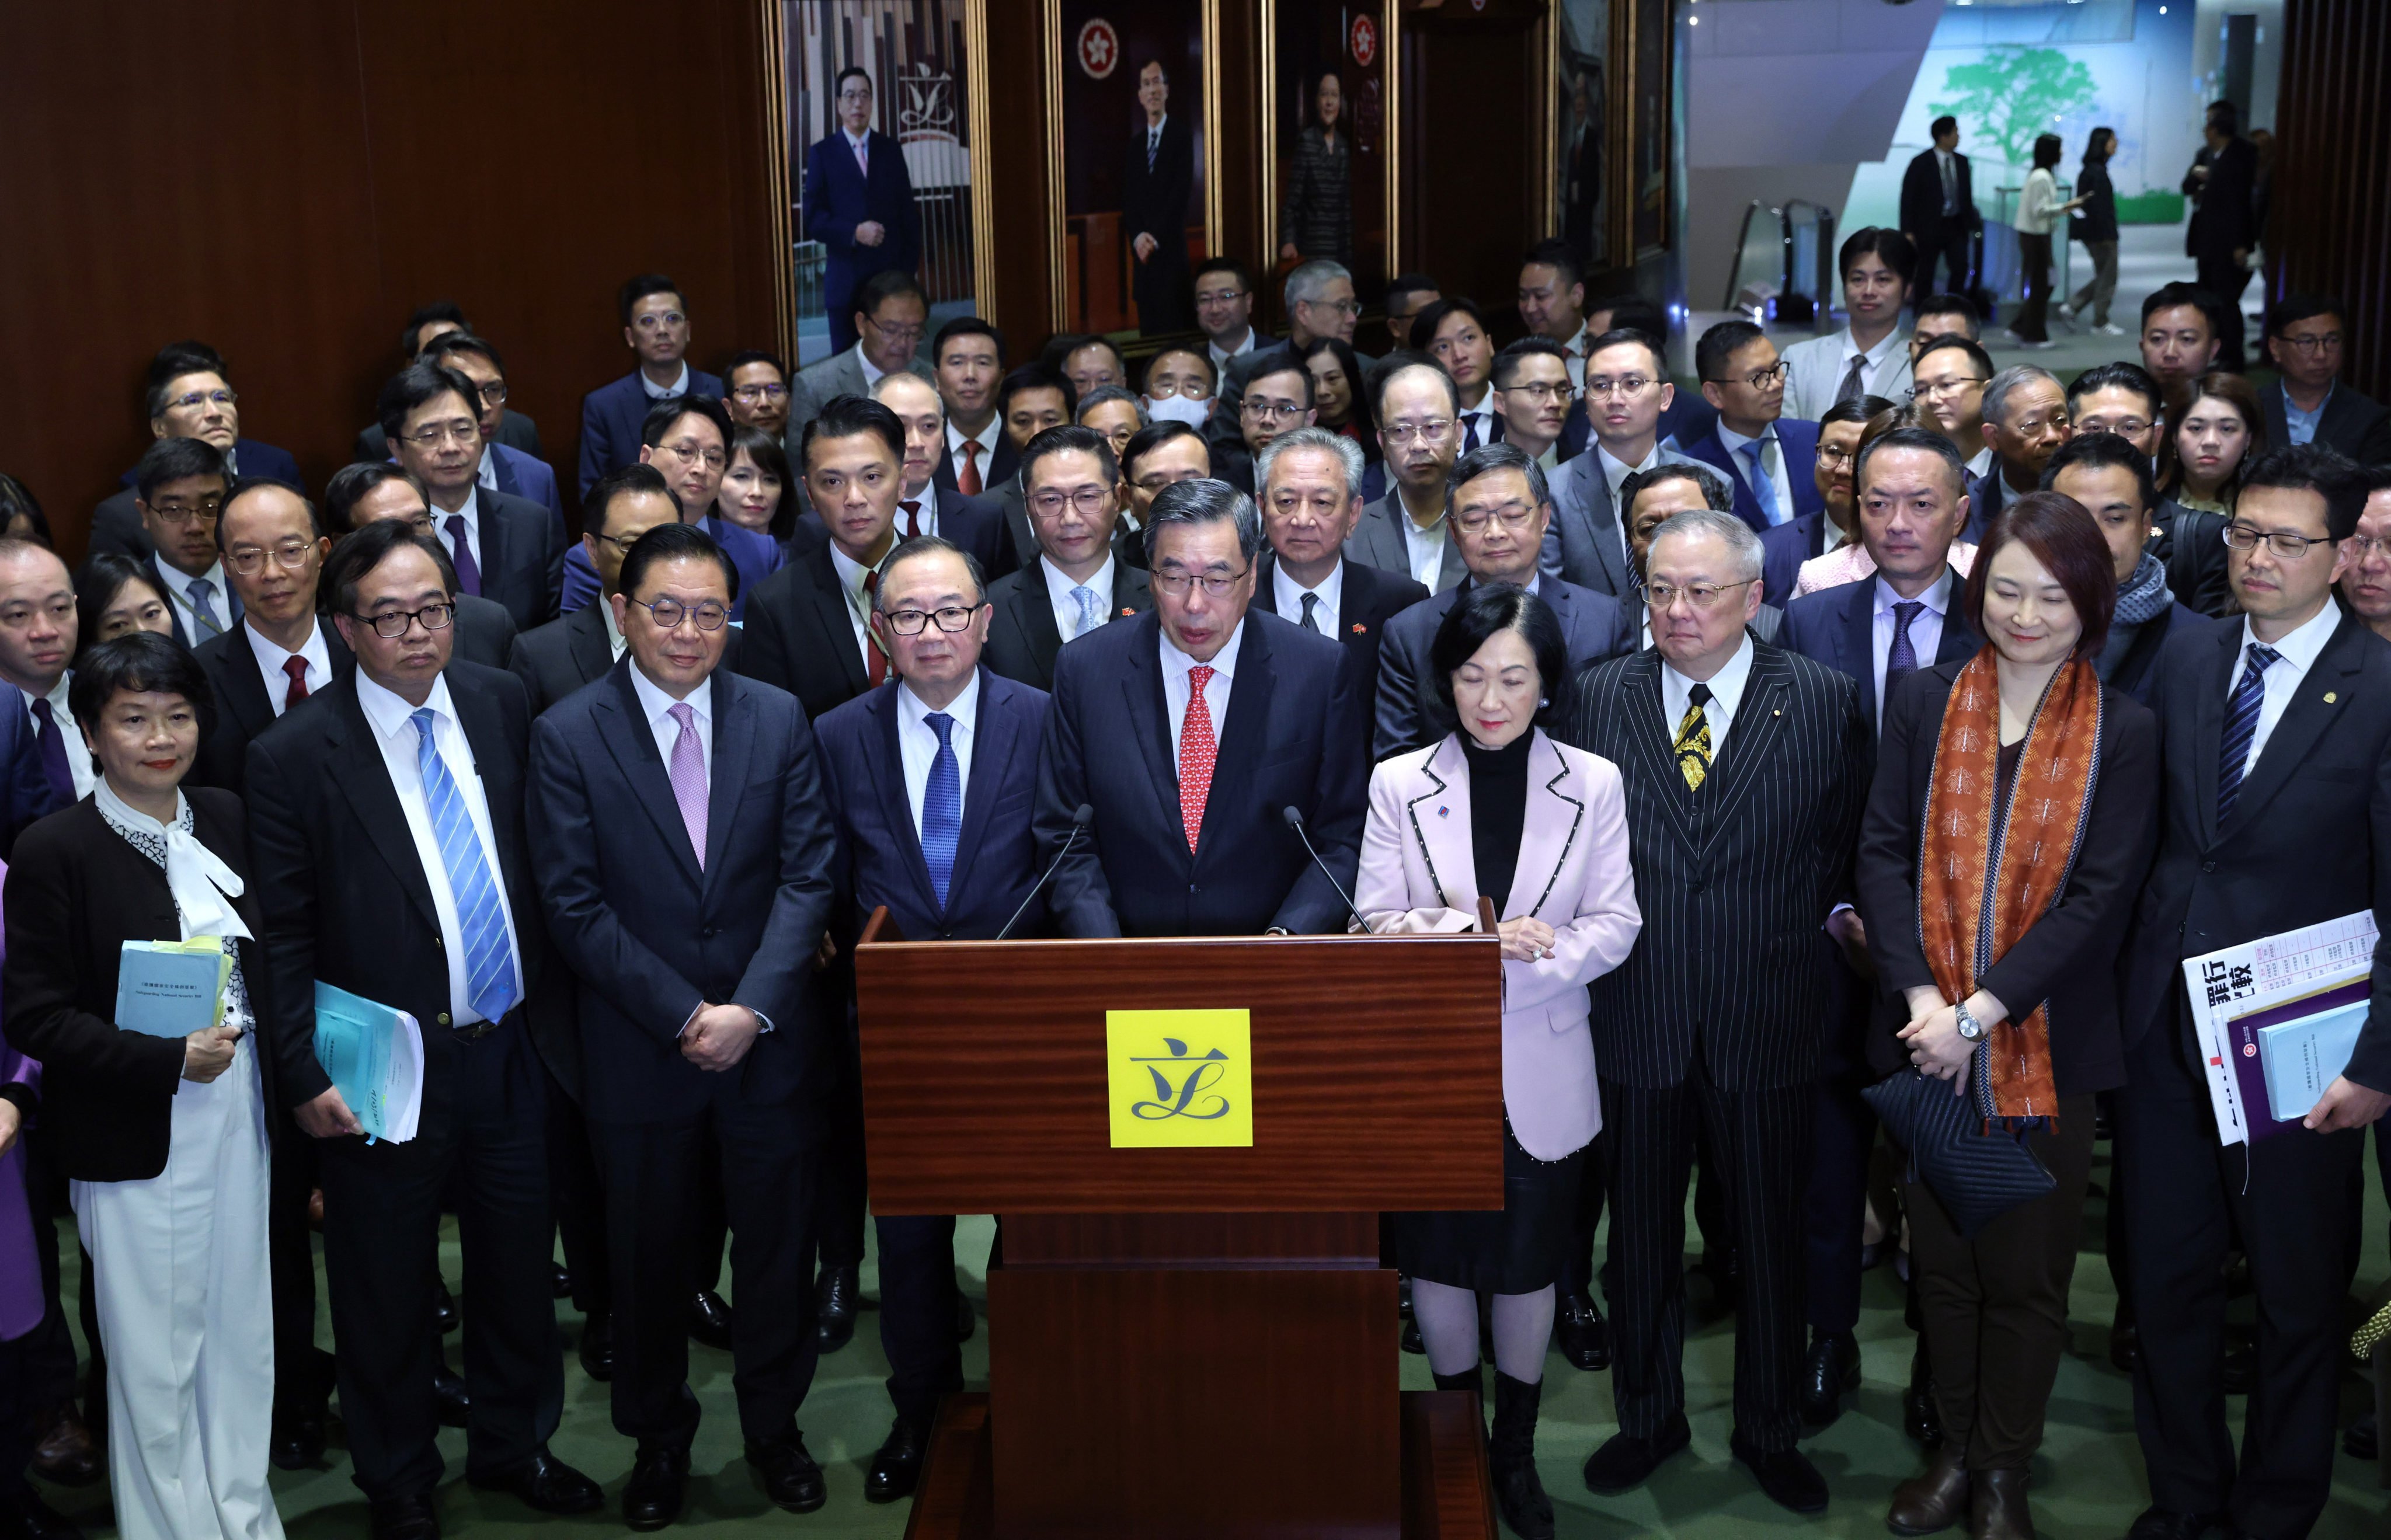 Andrew Leung, the Legco president, and council members after the legislature passed the city’s Article 23 bill. Photo: Yik Yeung-man